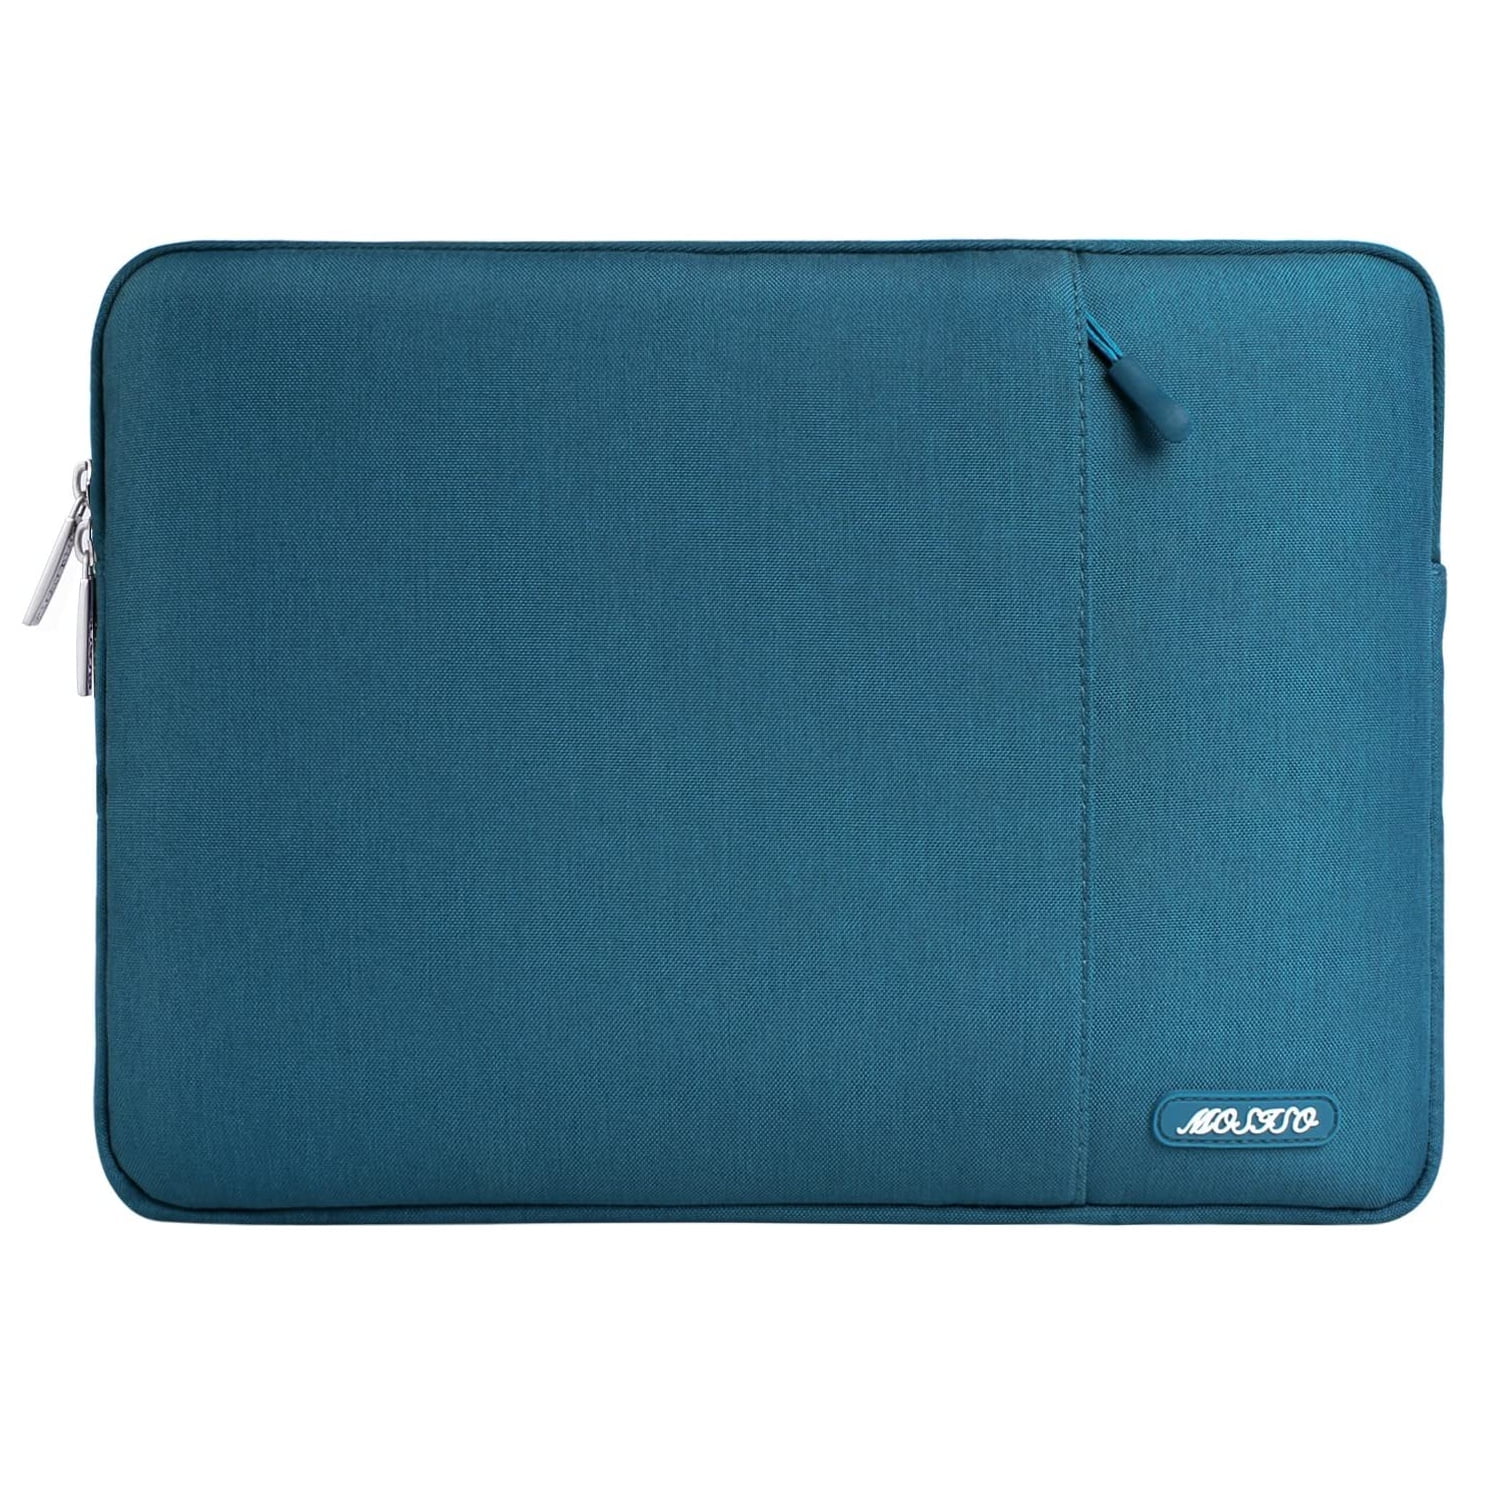 15 MacBook Case Cover 13 Handmade Sleeve Padded with Front Pocket Coral and Navy Laptop Case 11 